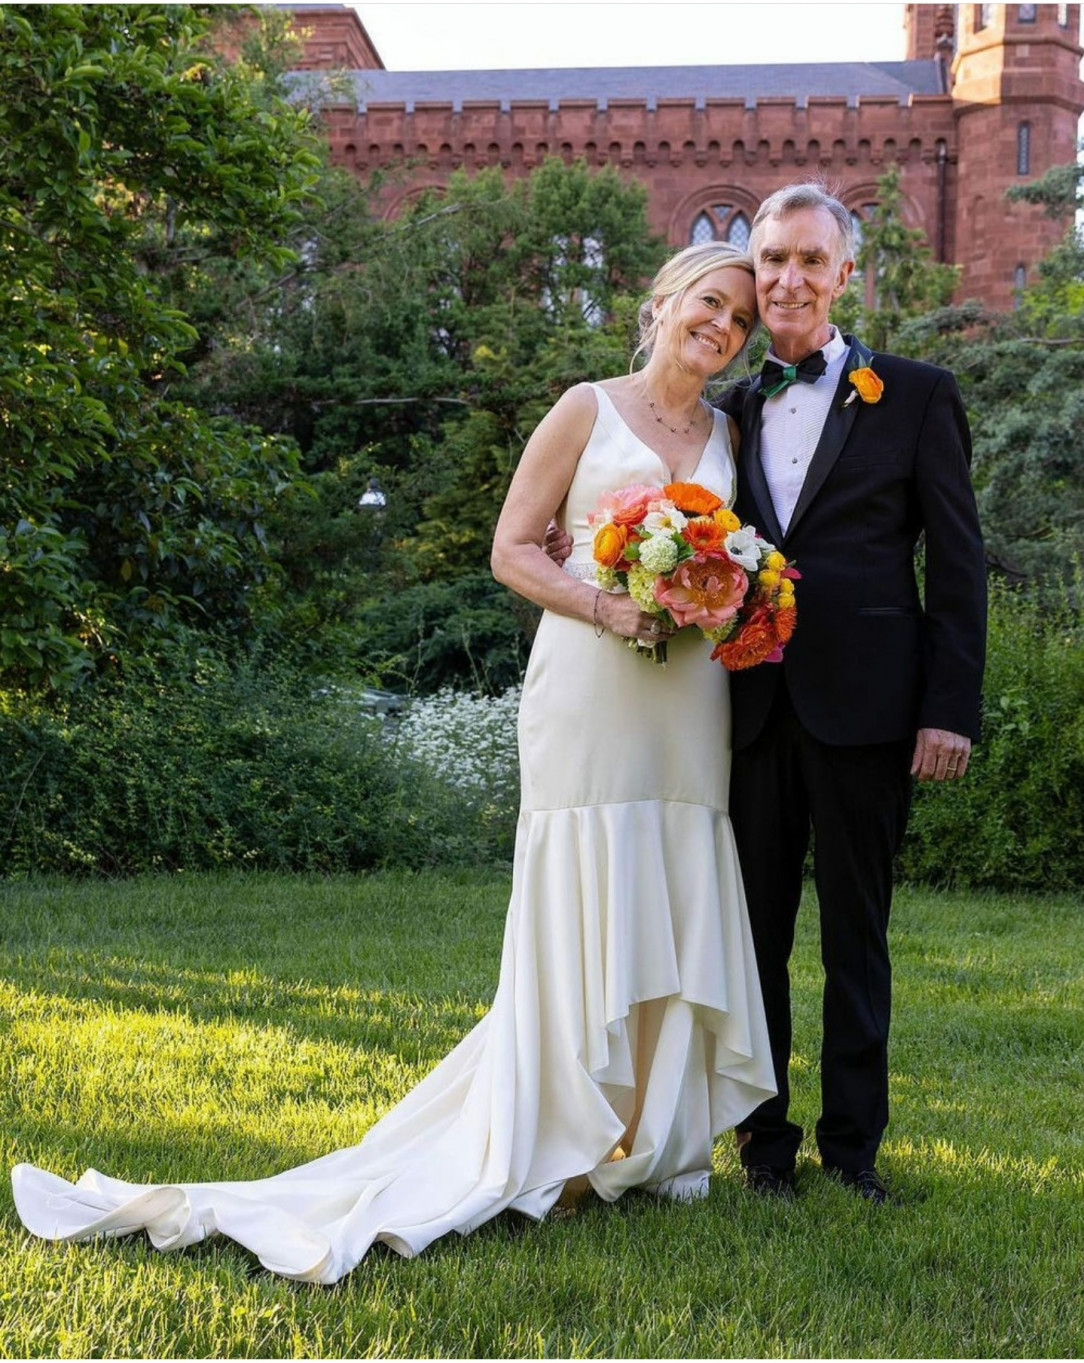 Congratulations to Bill Nye and Liza Mundy on their marriage